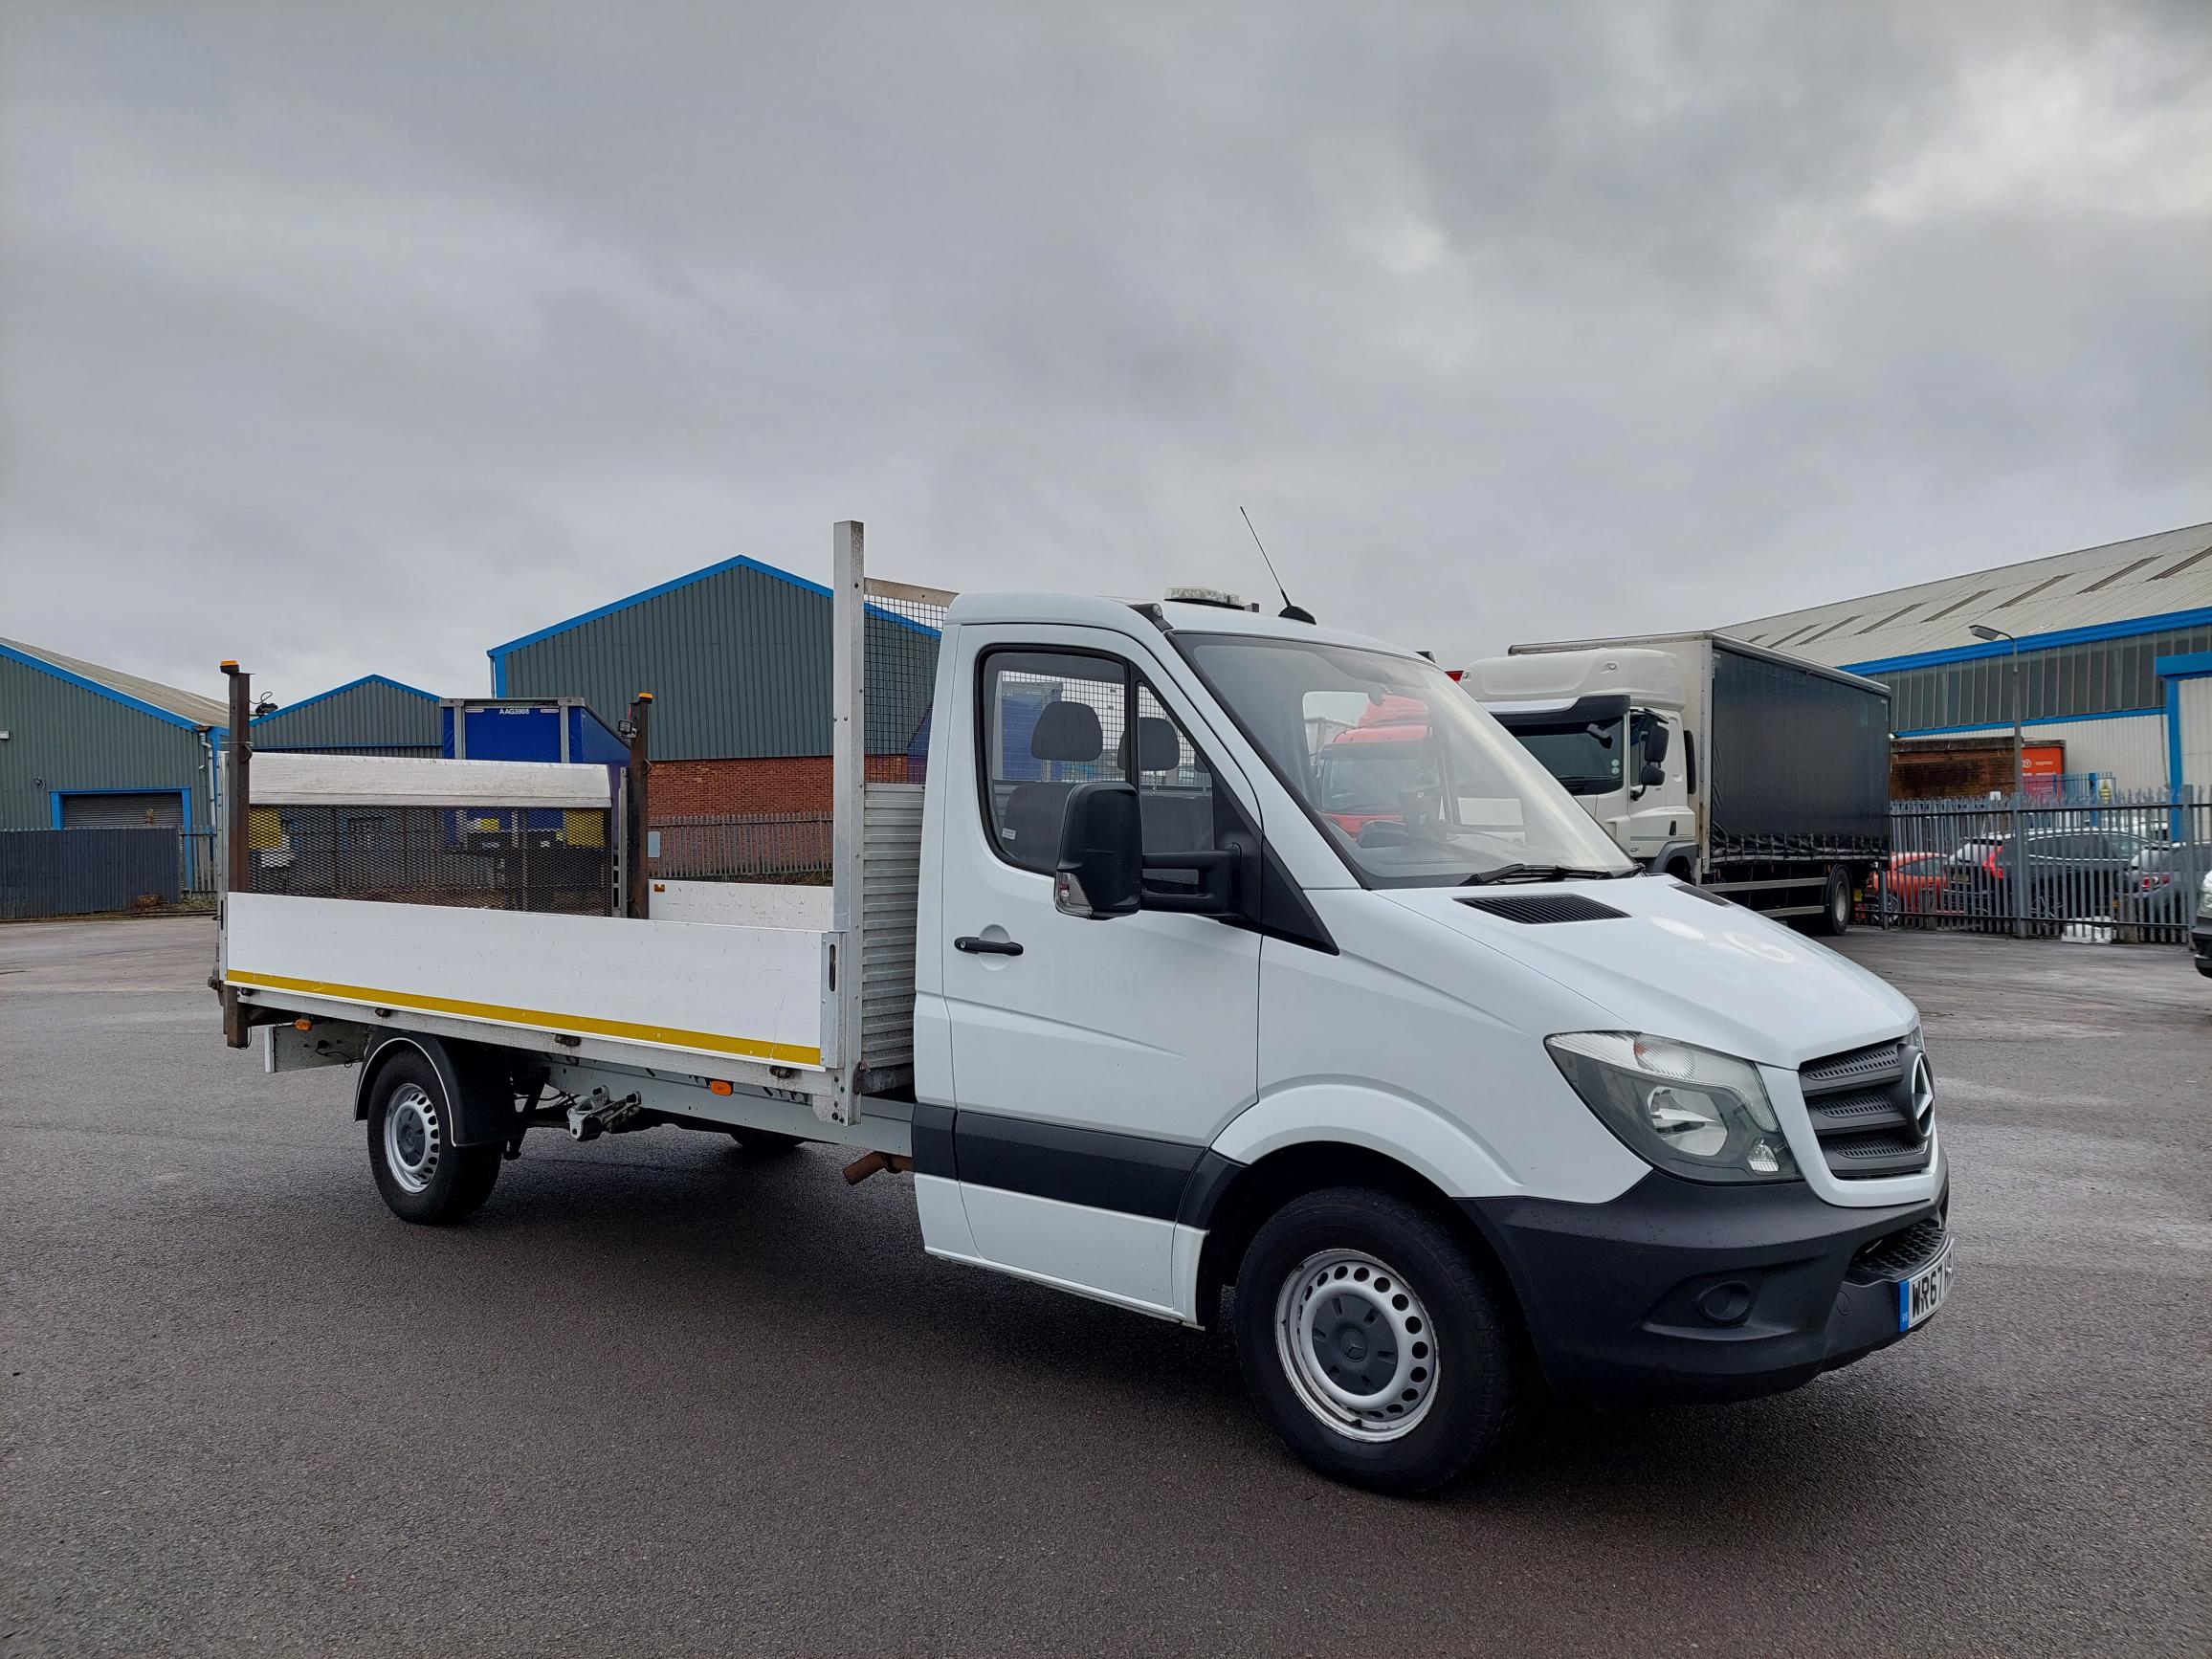 2017 (67) Mercedes Sprinter, 3.5 Tonne, Dropside, Manual Gearbox, Day Cab, Low Mileage, Electric Windows, Steering Wheel Controls, Warranty & Finance Options Available.